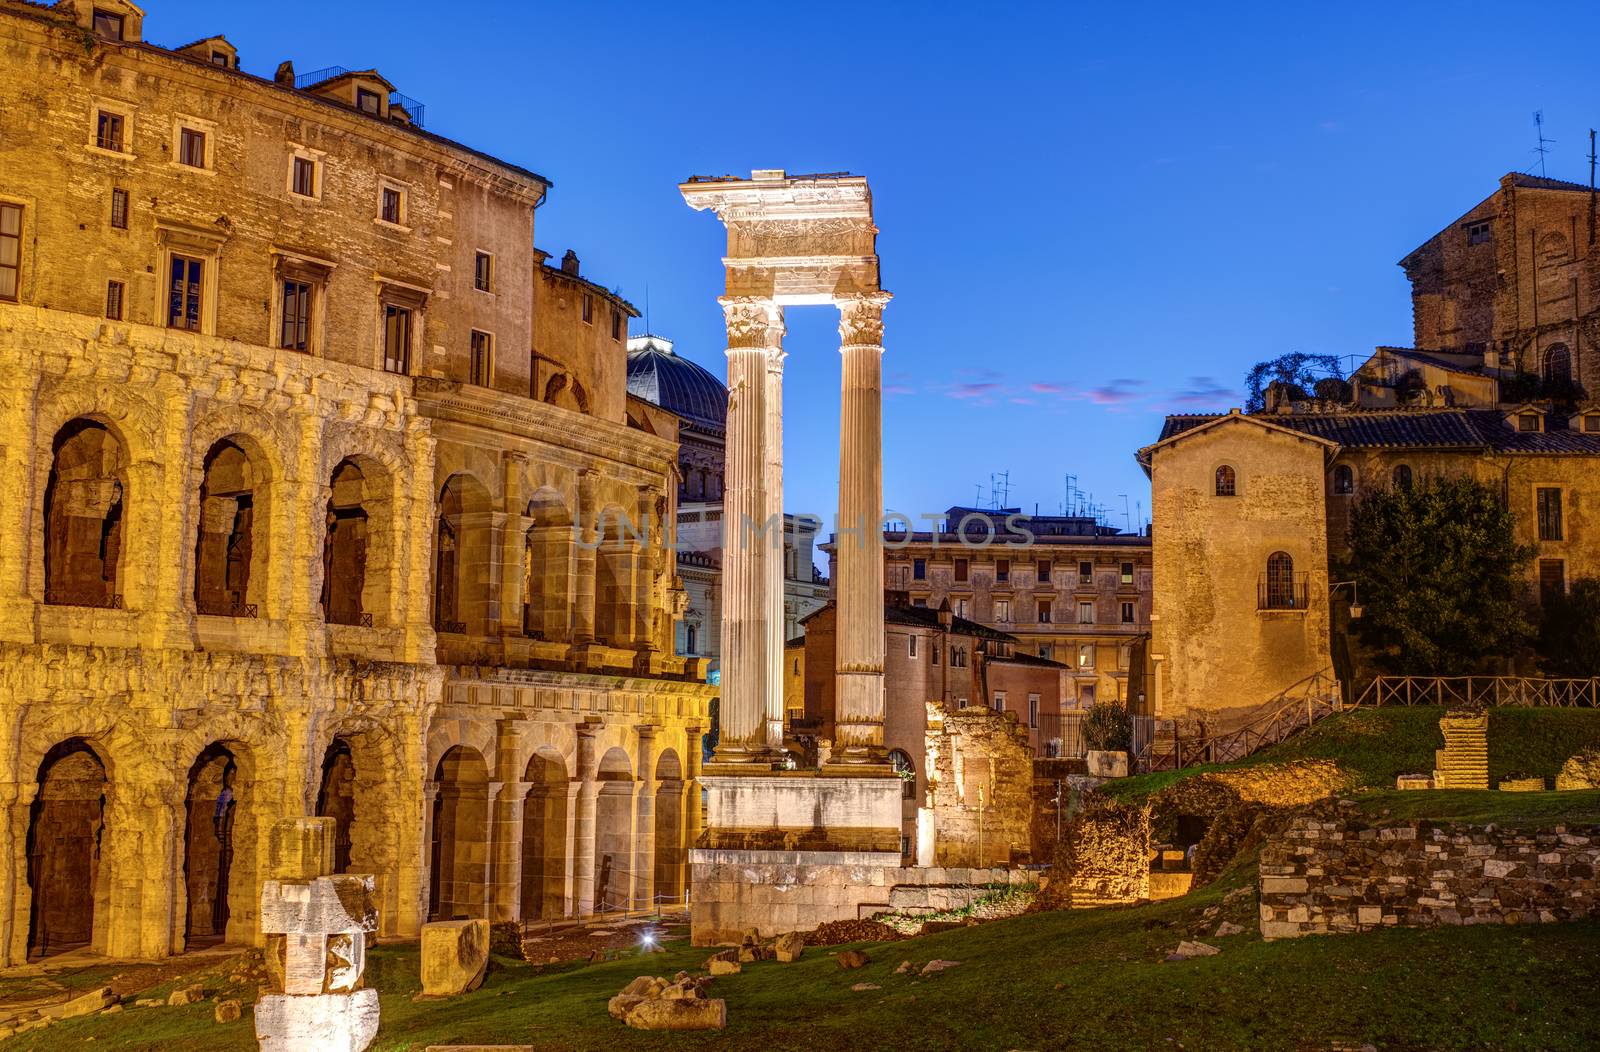 The Theatre of Marcellus and the Temple of Apollo Sosianus in Rome, Italy, at dusk